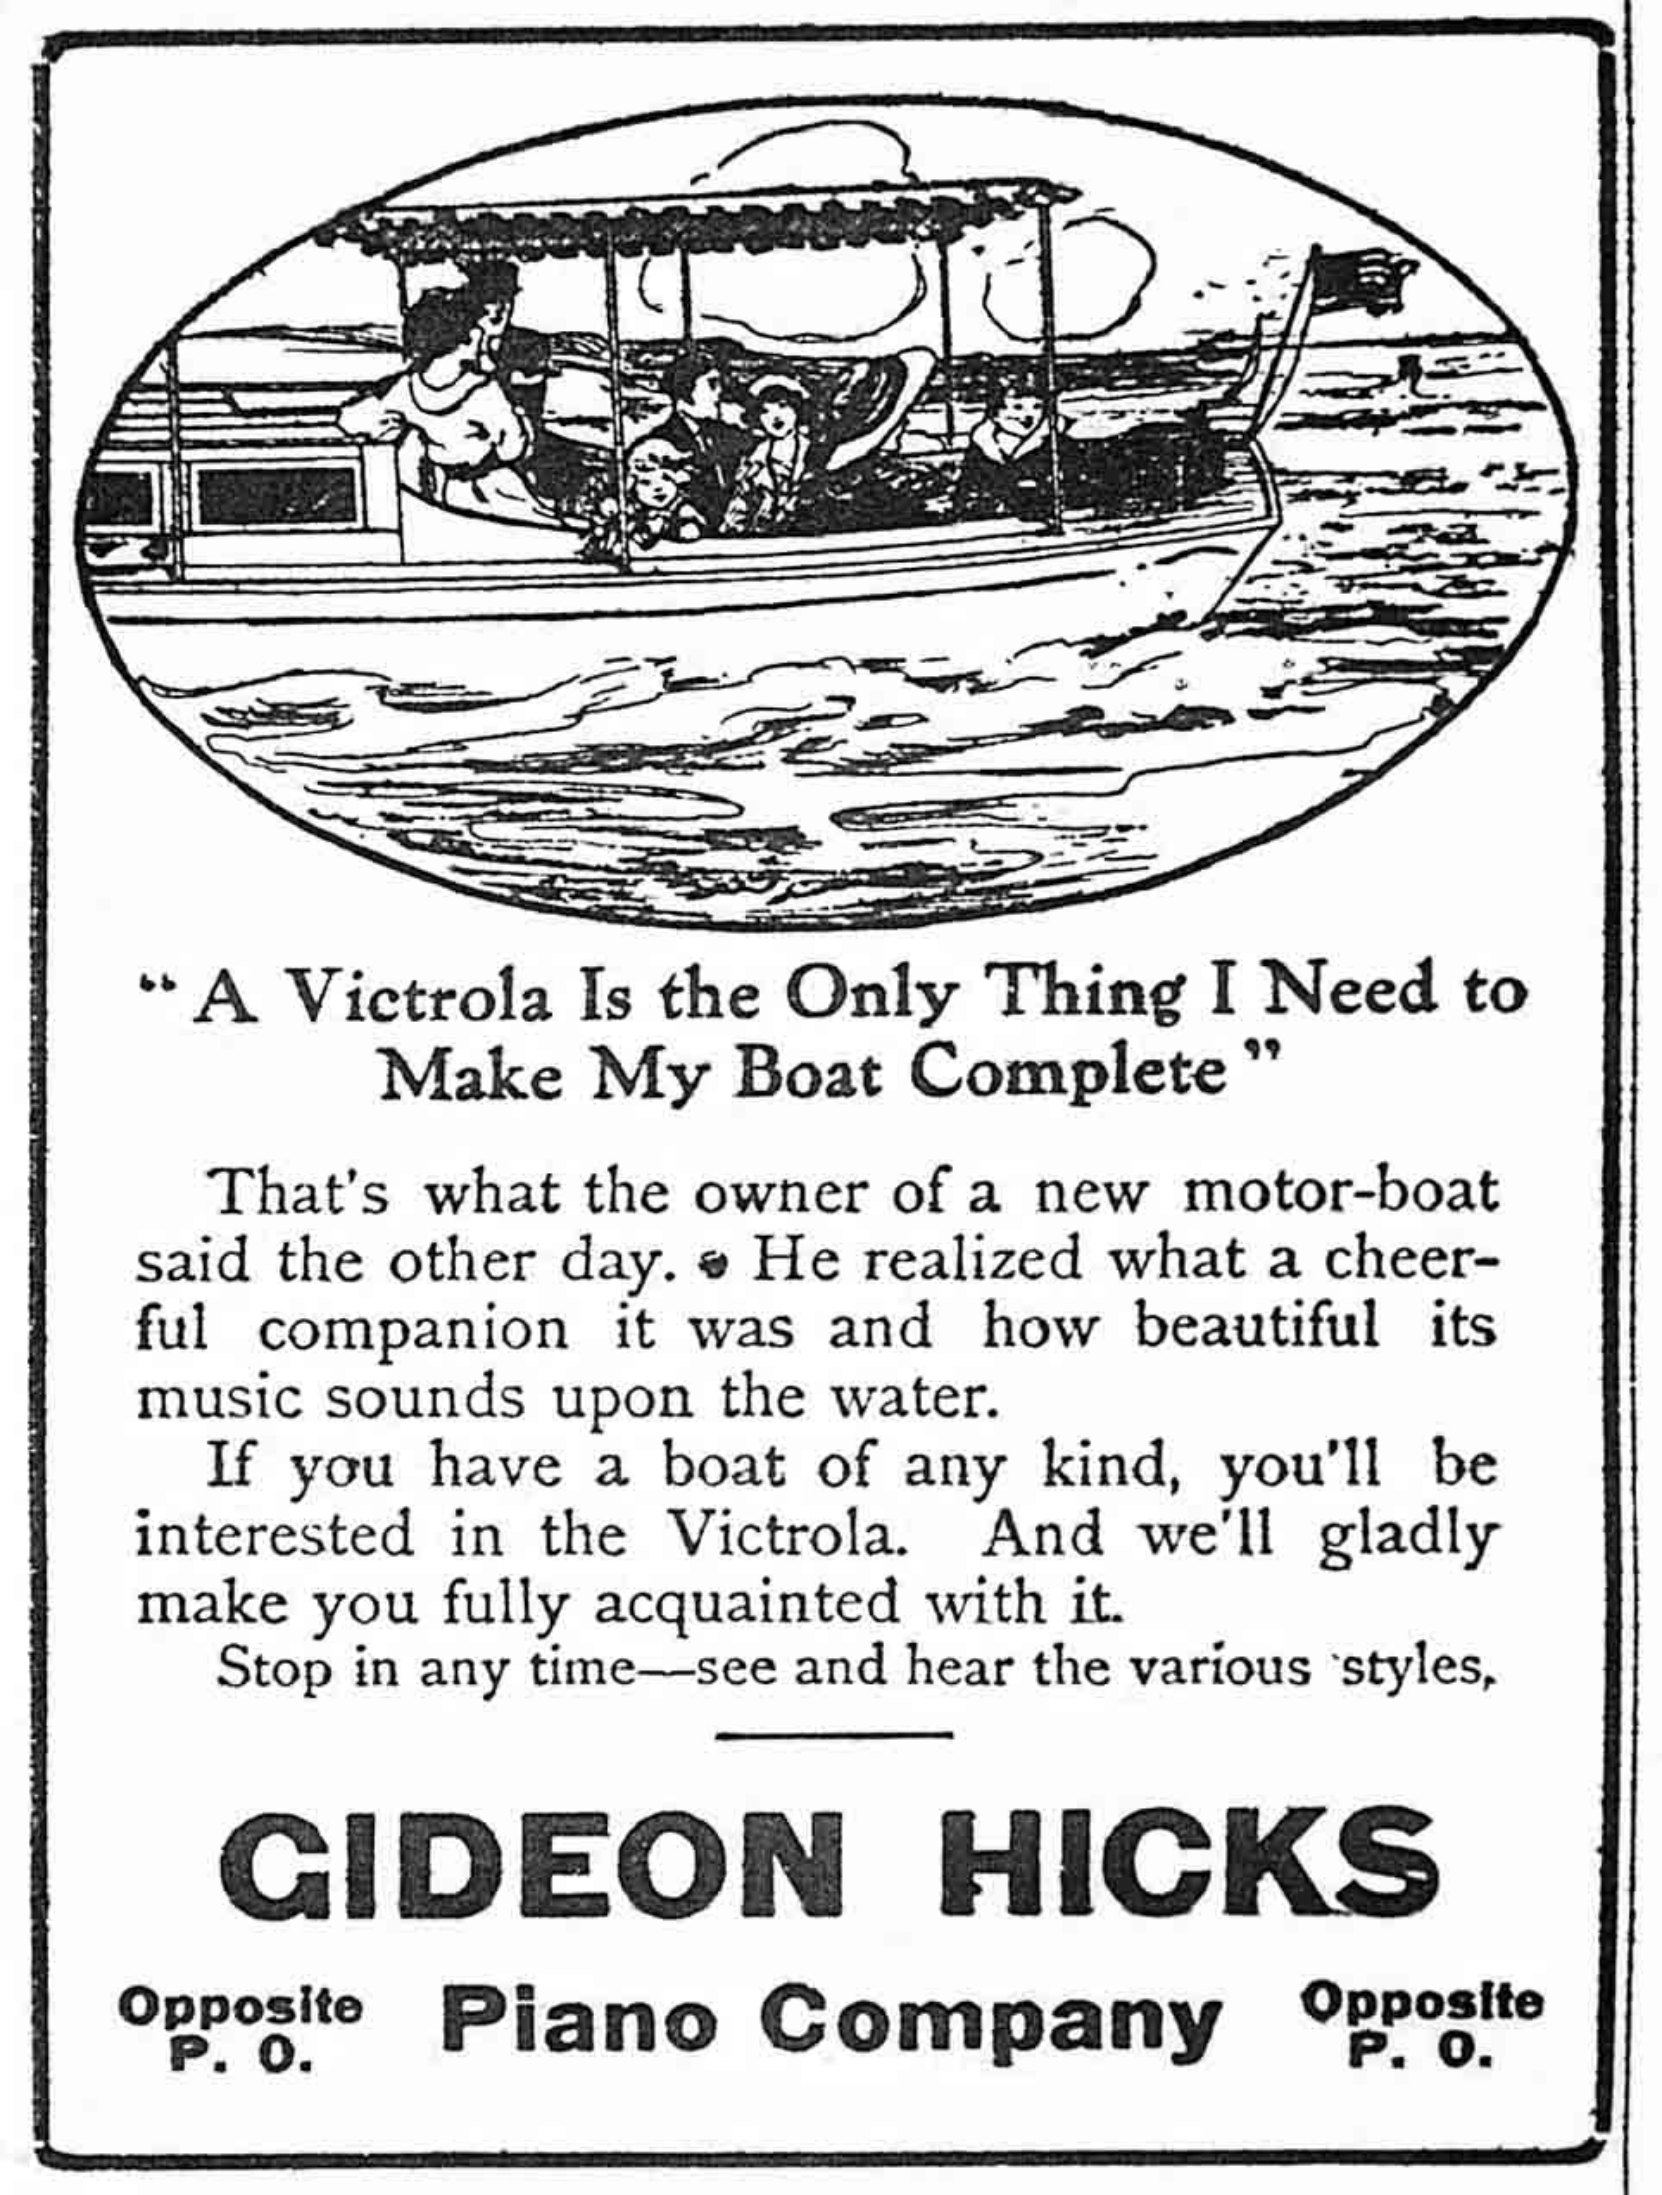 The Gideon Hicks Piano Company occupied space at 811-813 Goverment Street, in the Metropolitan Building, circa 1912-20. This advertisement appeared circa 1914.